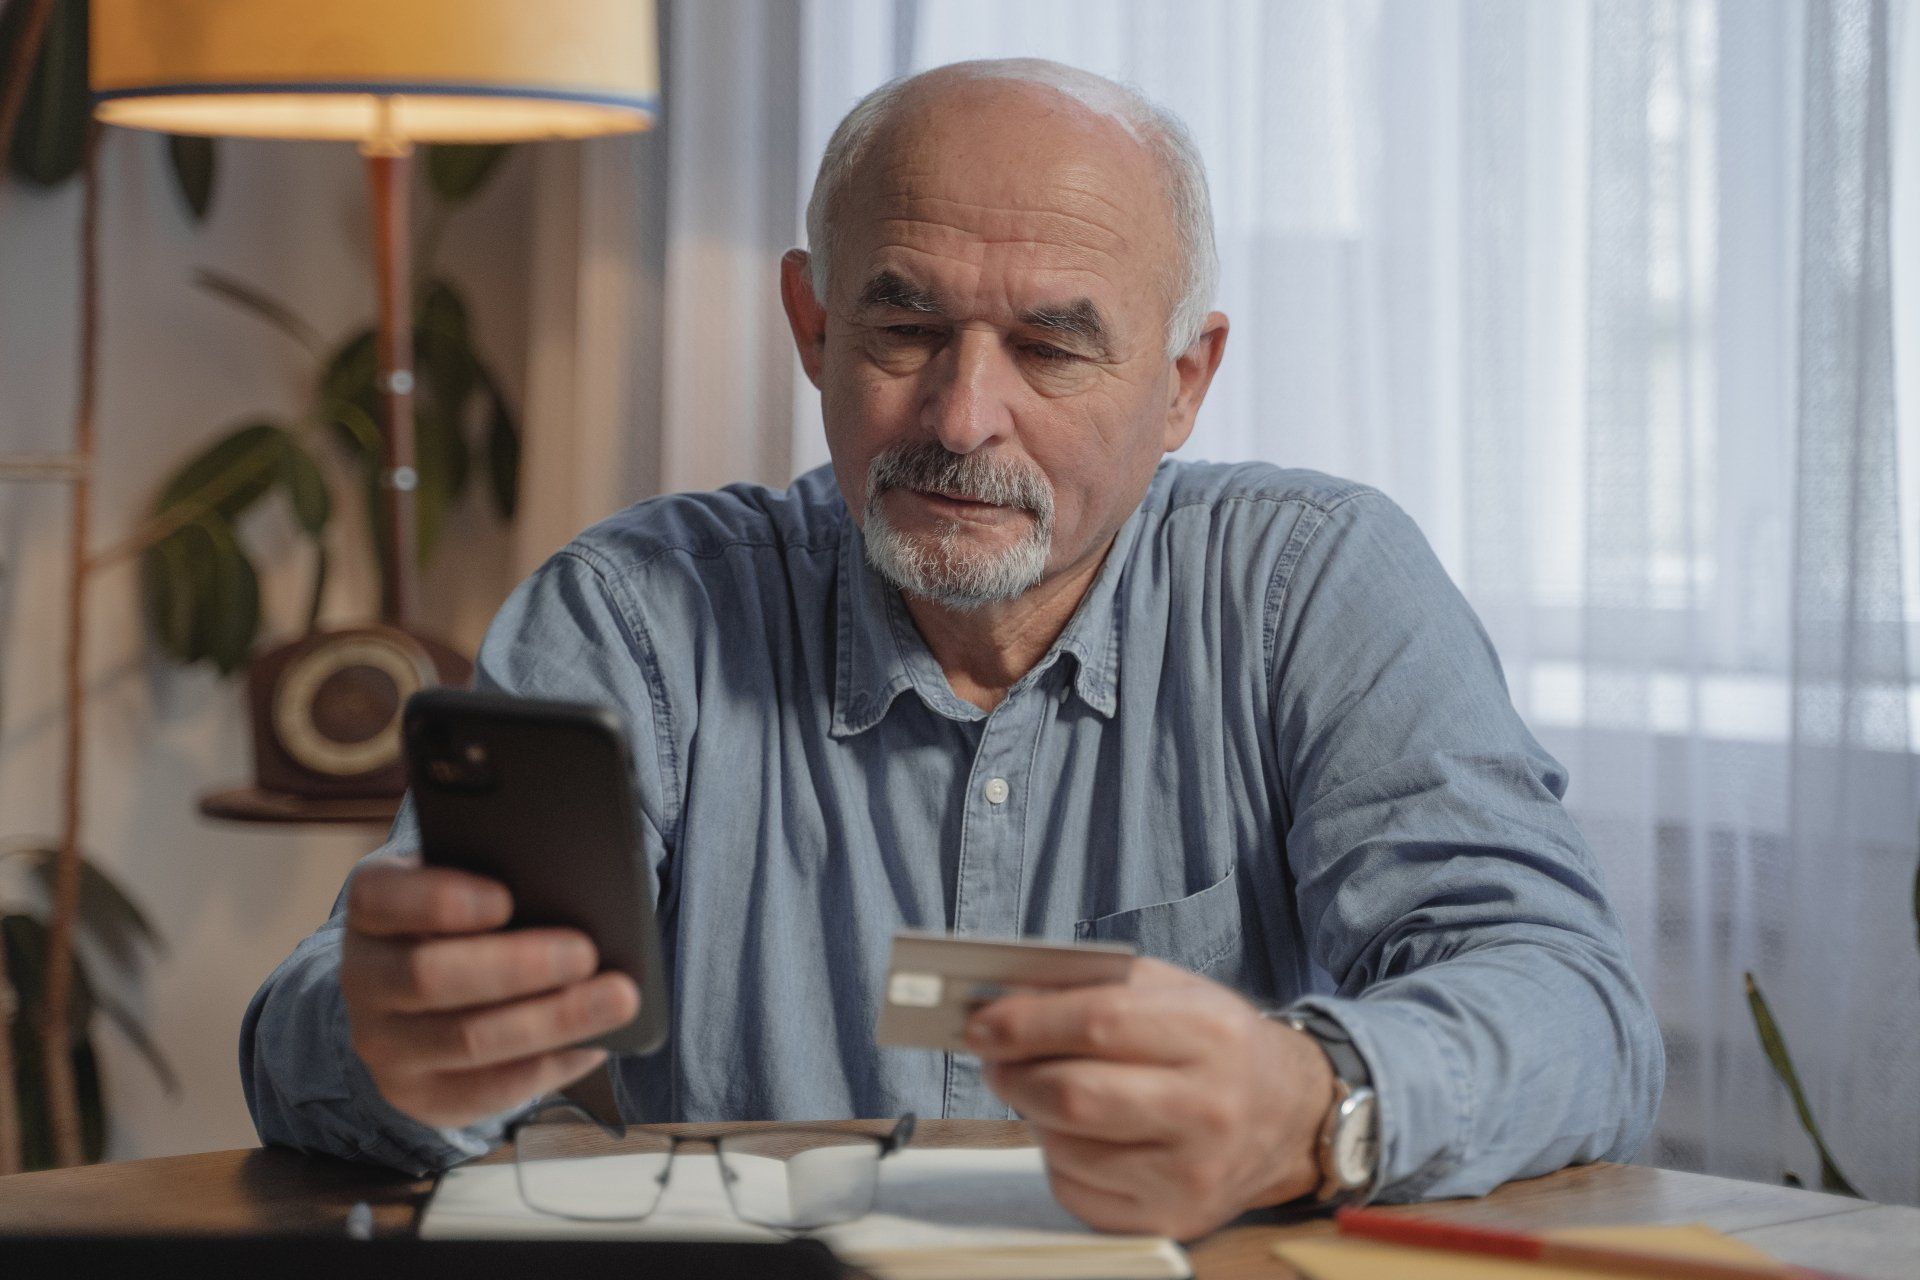 Senior Citizen holding phone and looking at credit card